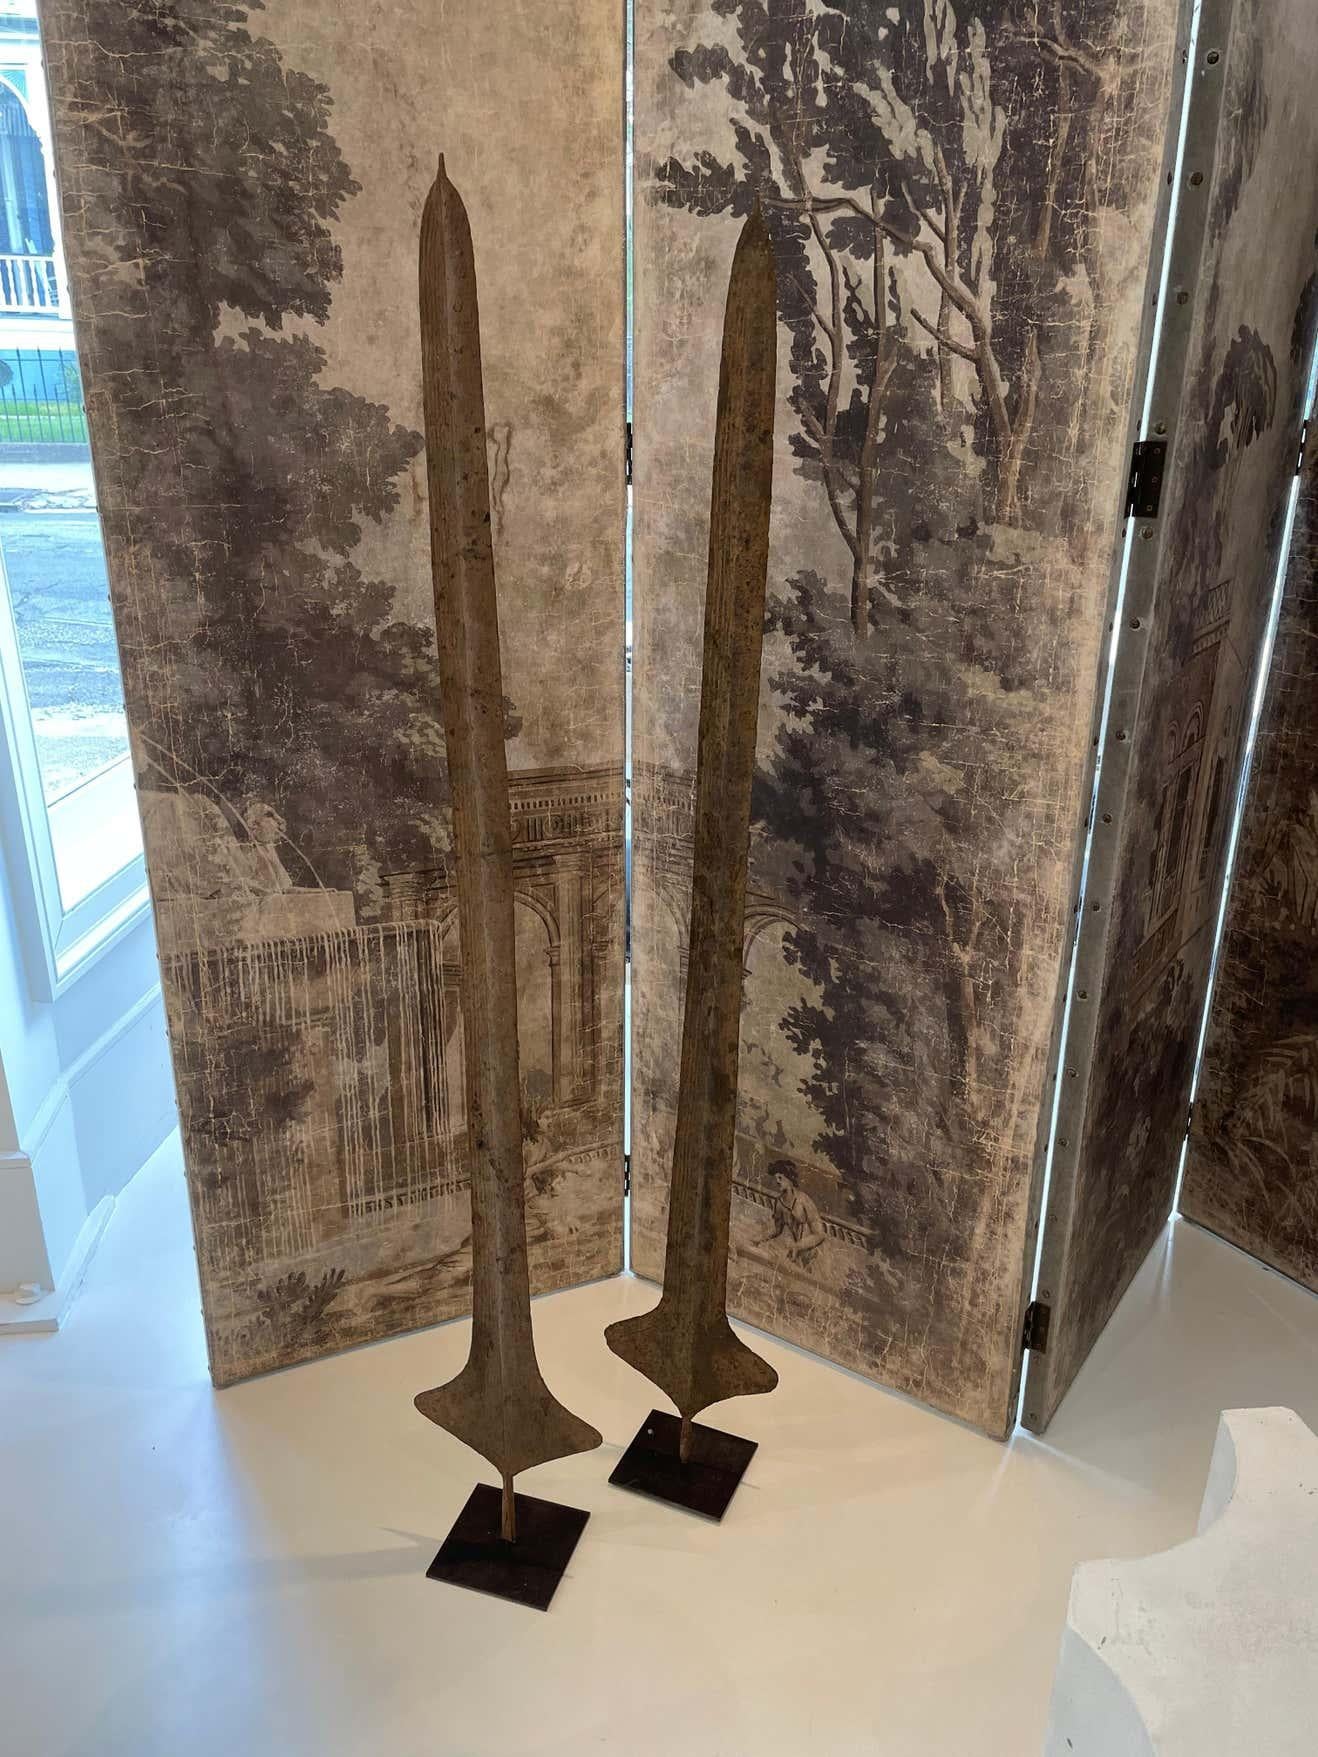 African currency sword that was used in the Congo for important transactions such as dowry or land purchases. The patina and sculptural shape give the feel of contemporary art mixed with 19th century history. Displayed on metal stand.